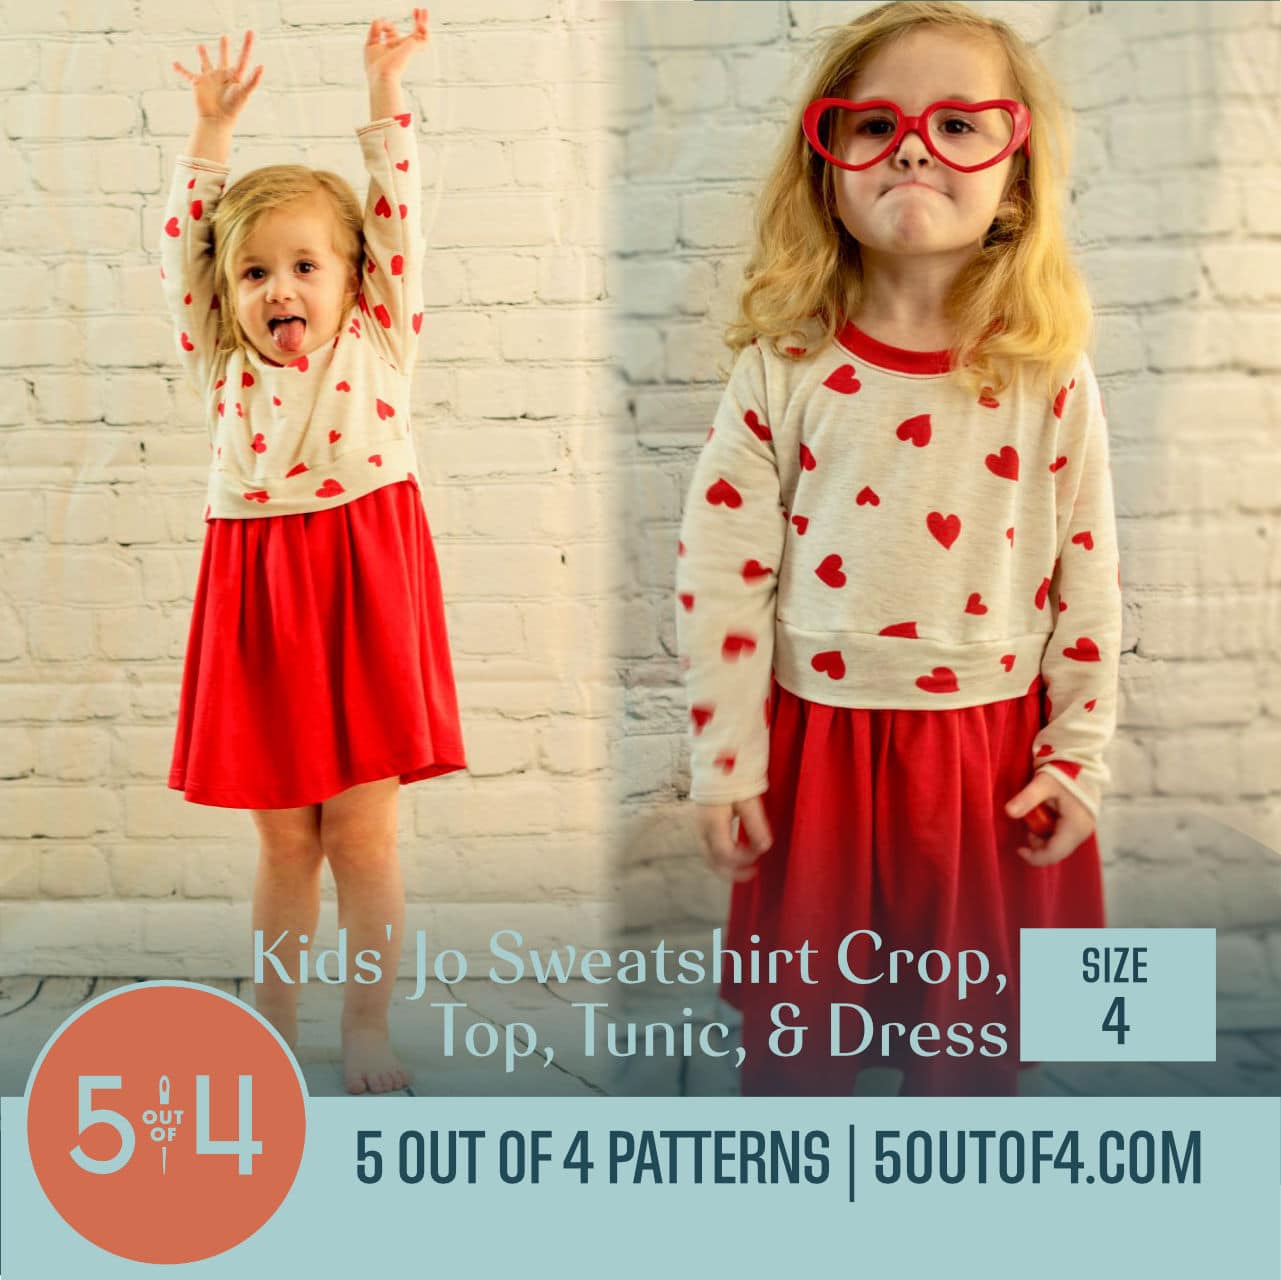 GIRLS SEWING PATTERN Make Fall Clothes Kids Clothing Tunic Top Shirt Leggings  Child Size 3 4 5 6 7 8 10 12 14 Children Outfit 8430 